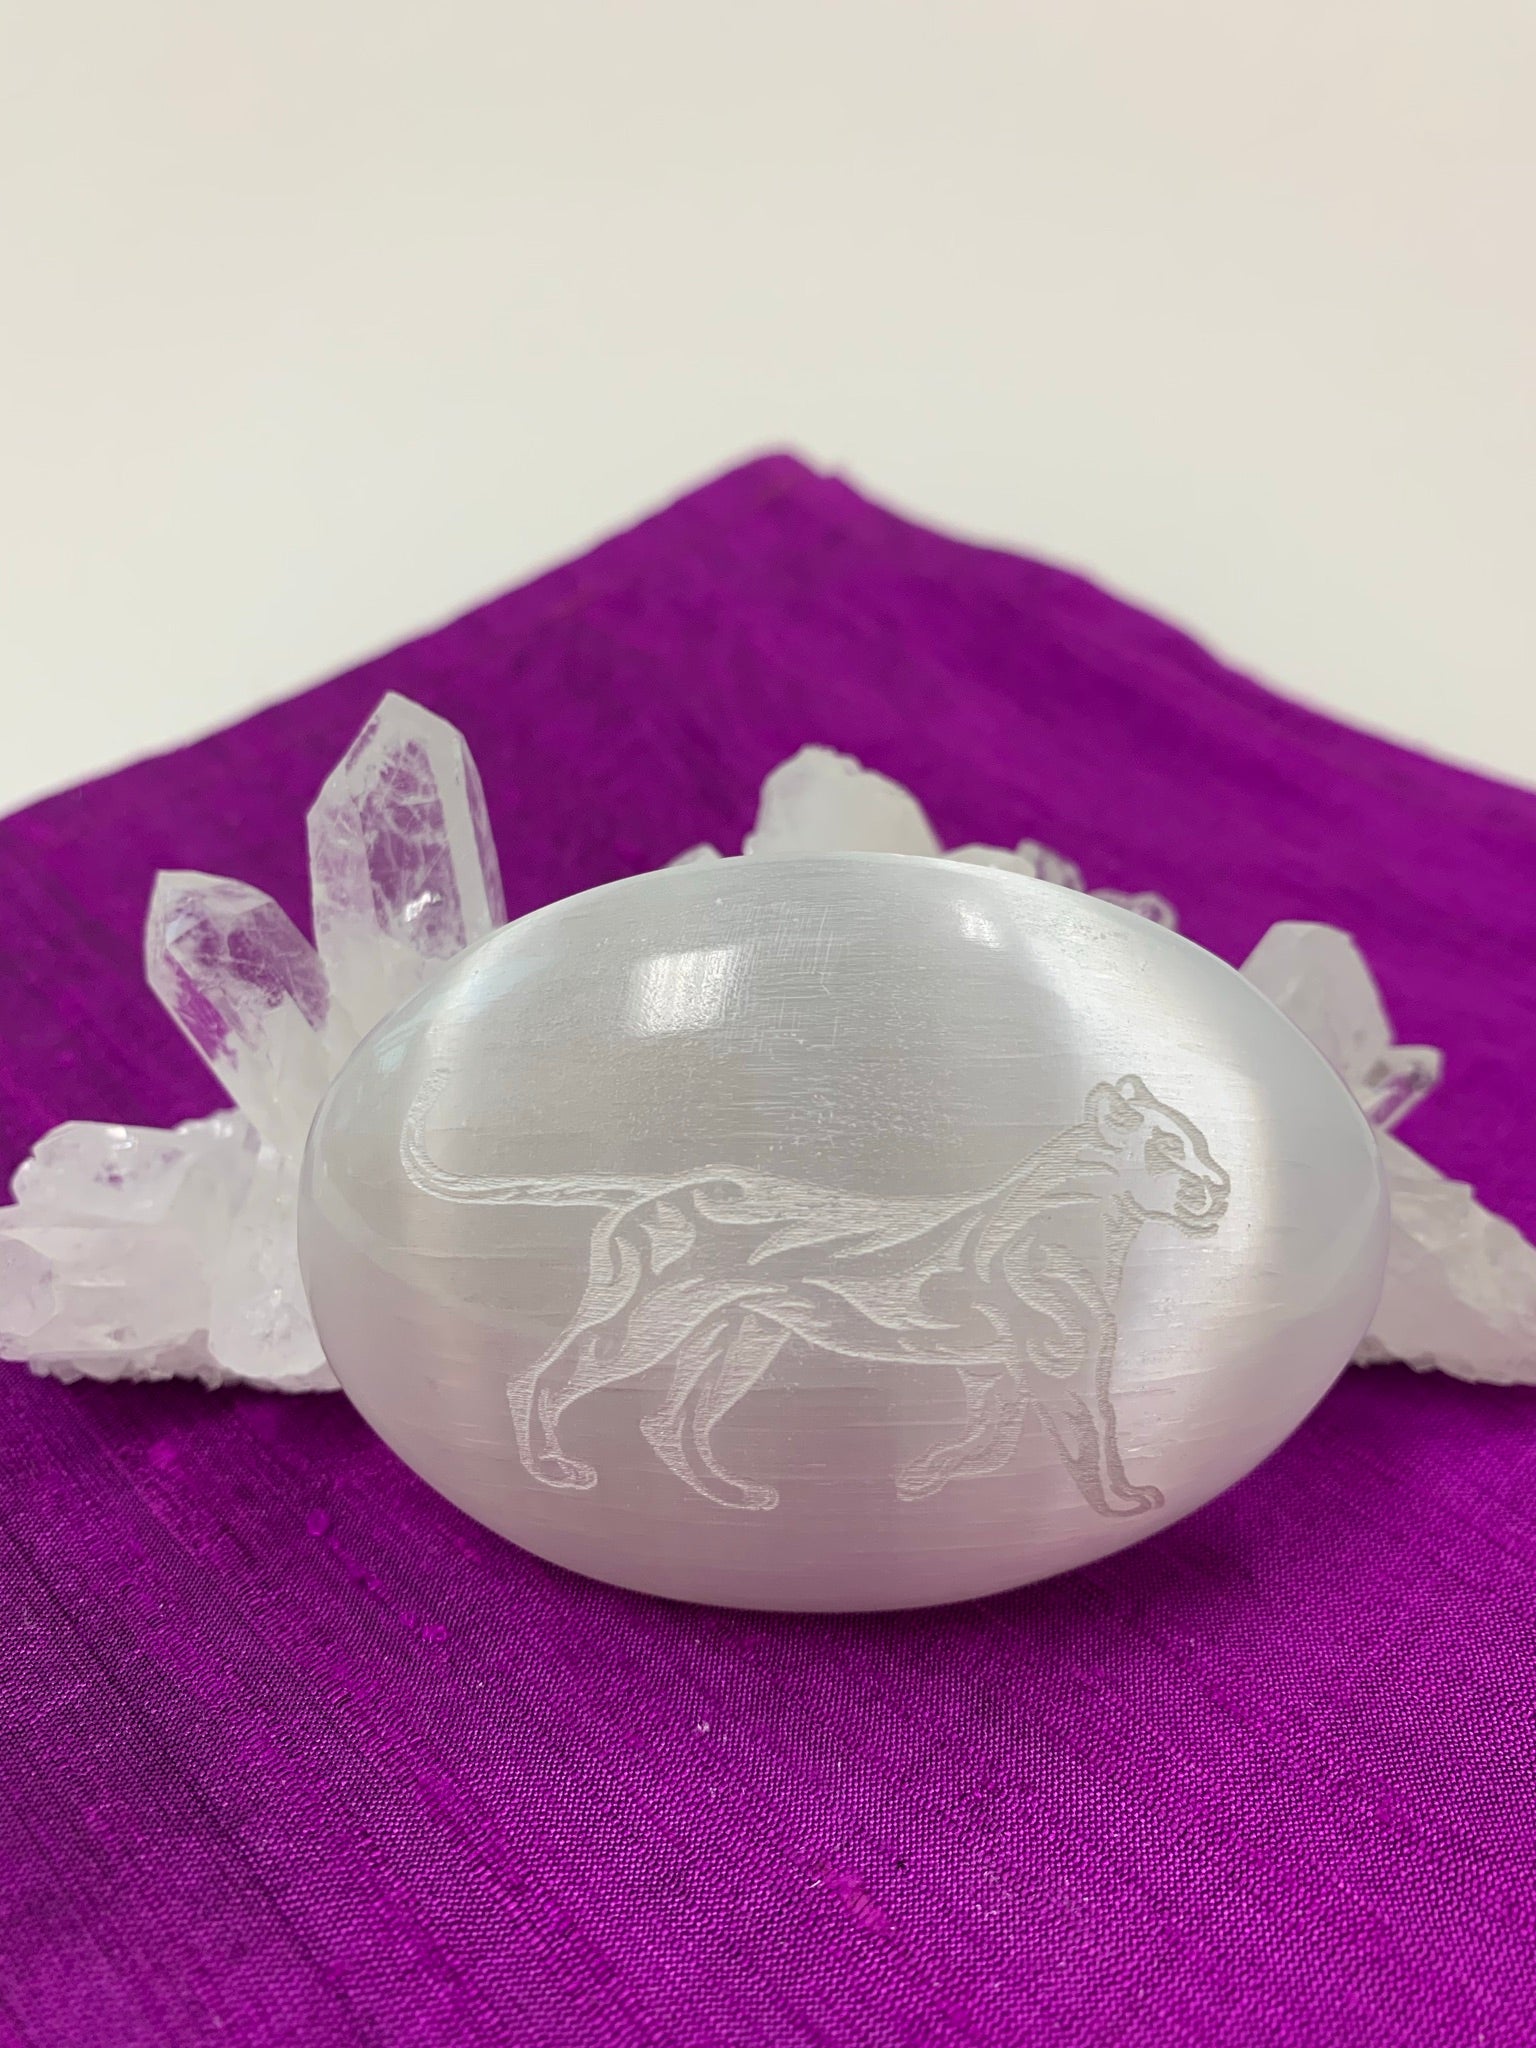 Lioness etched on white, polished selenite palm stone from our spirit animal collection. Lioness embodies the goddess & divine feminine and is related to The Great Mother. She is also seen as a protector, provider and as resourceful. She is the nurturer and fierce protector. The selenite ranges from translucent to milky white depending on the stone. Selenite is sourced ethically and workers are paid living wages. 